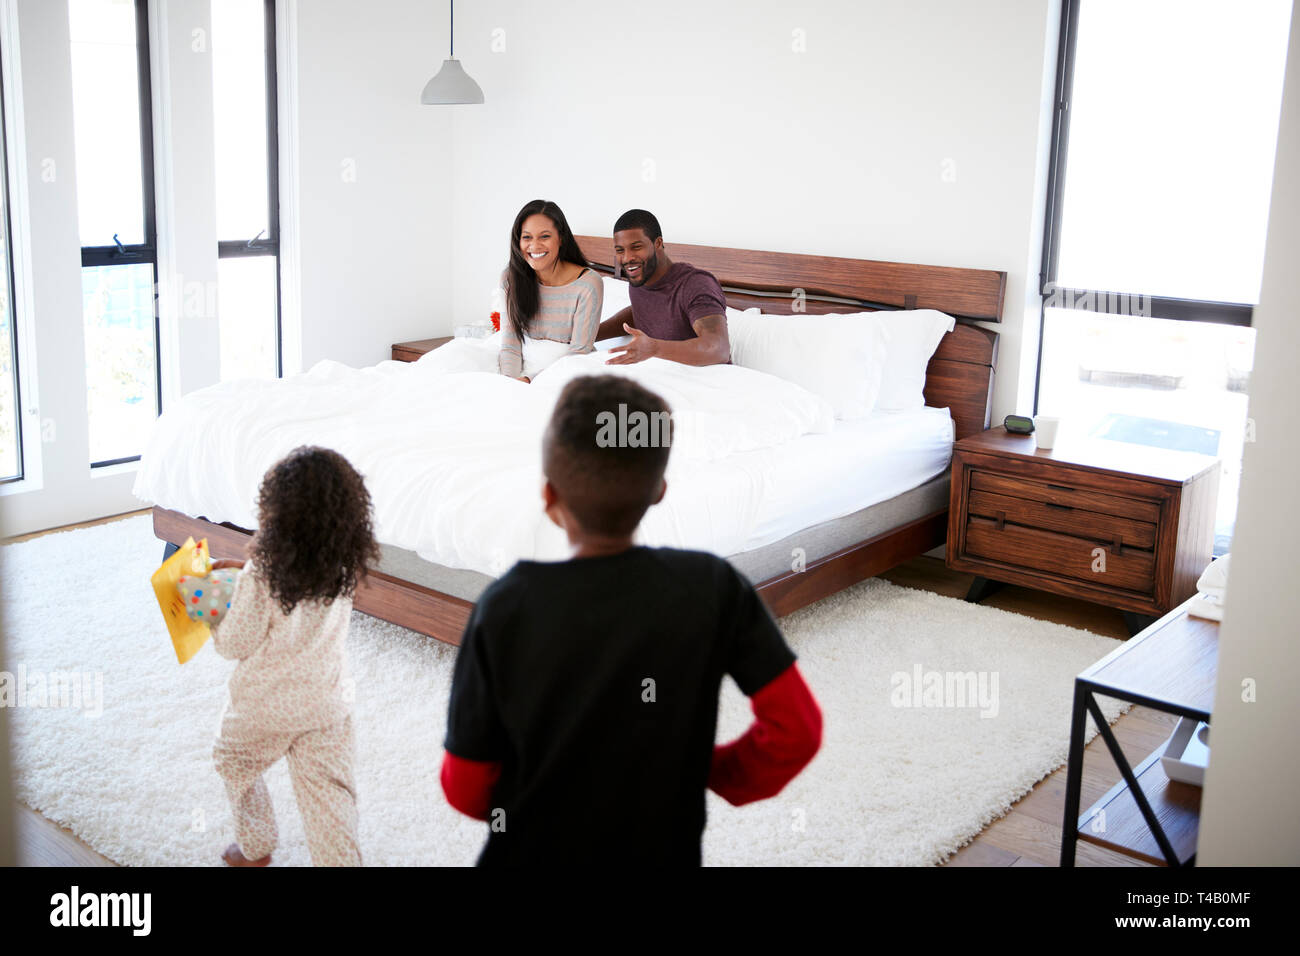 Children Running Into Parents Bedroom With Gift And Card In Bed To Celebrate Mothers Day Or Birthday Stock Photo